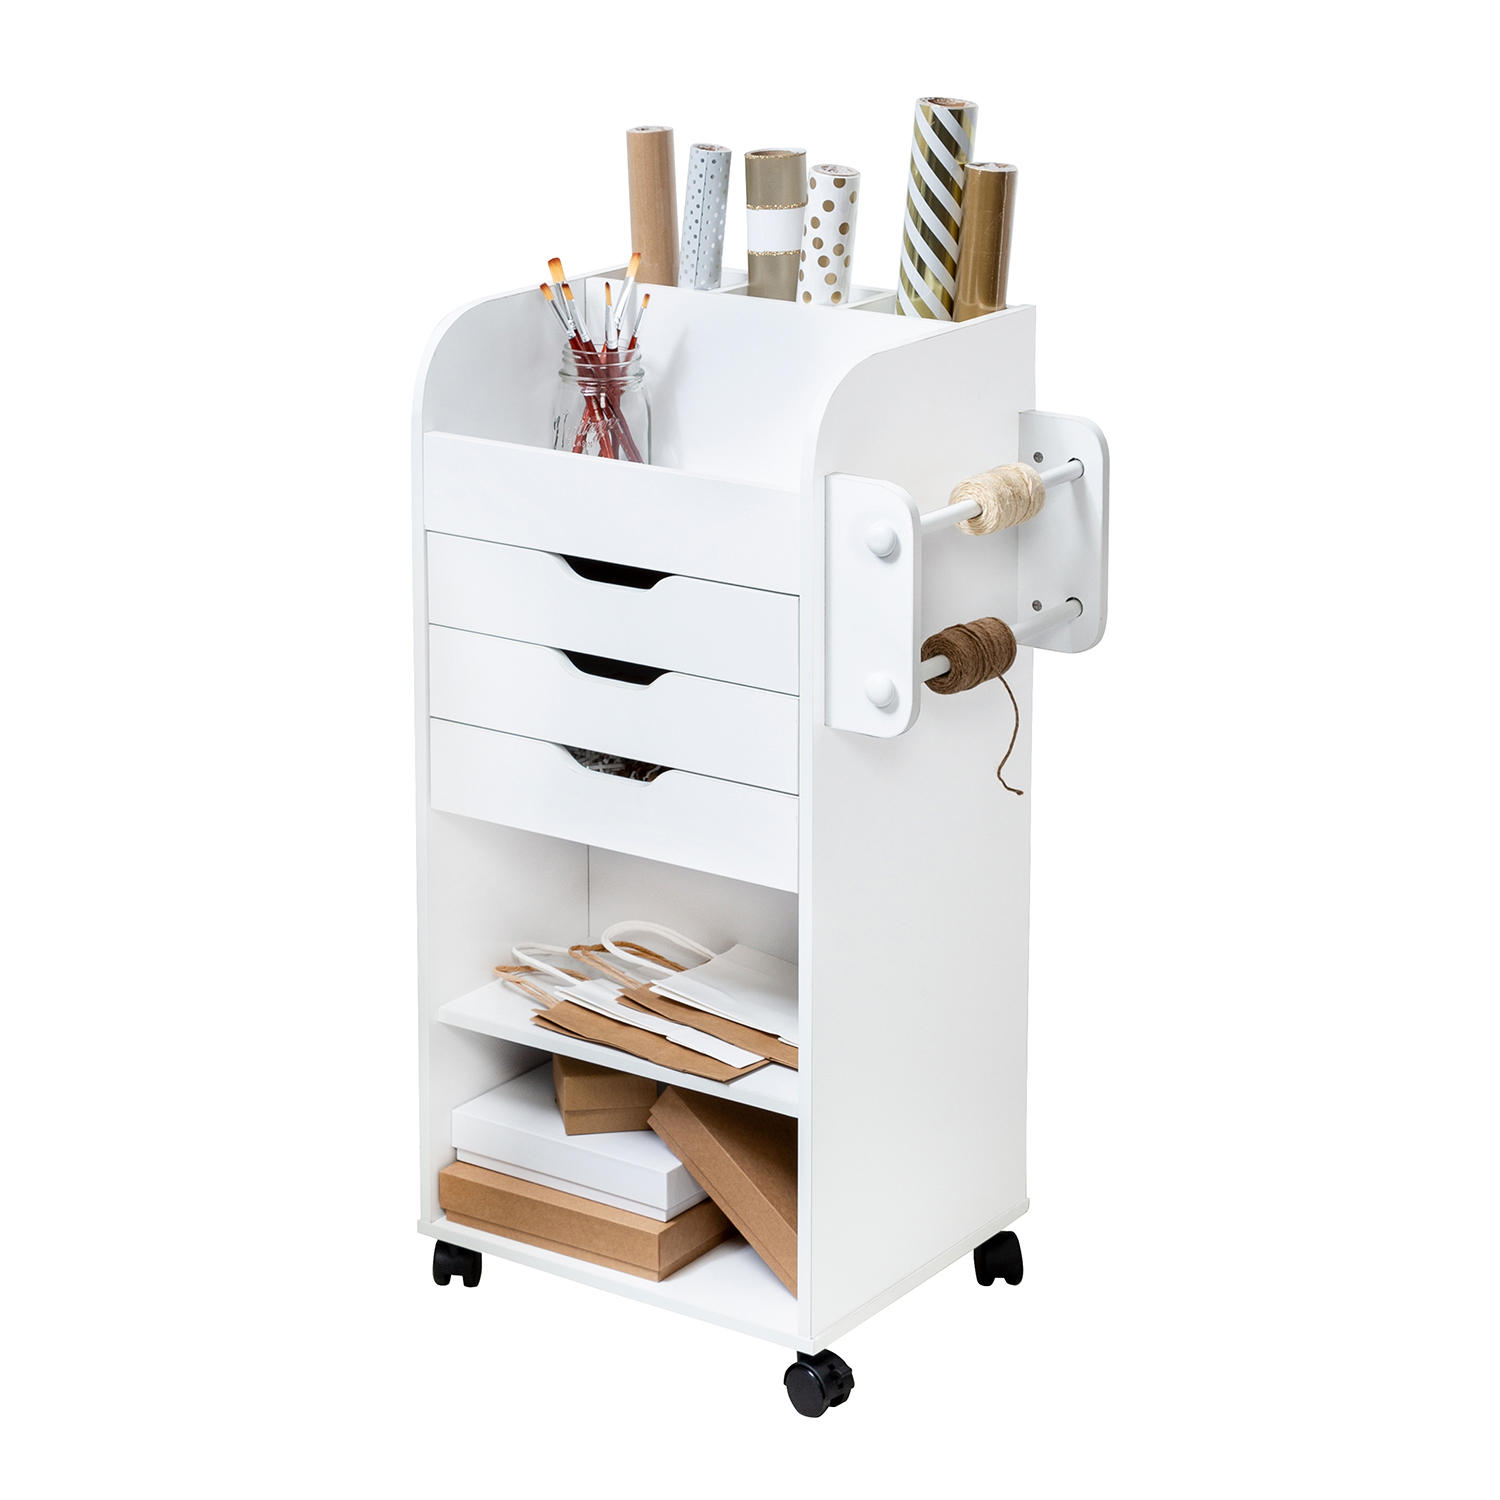 Honey-Can-Do White Rolling Craft Storage Cart